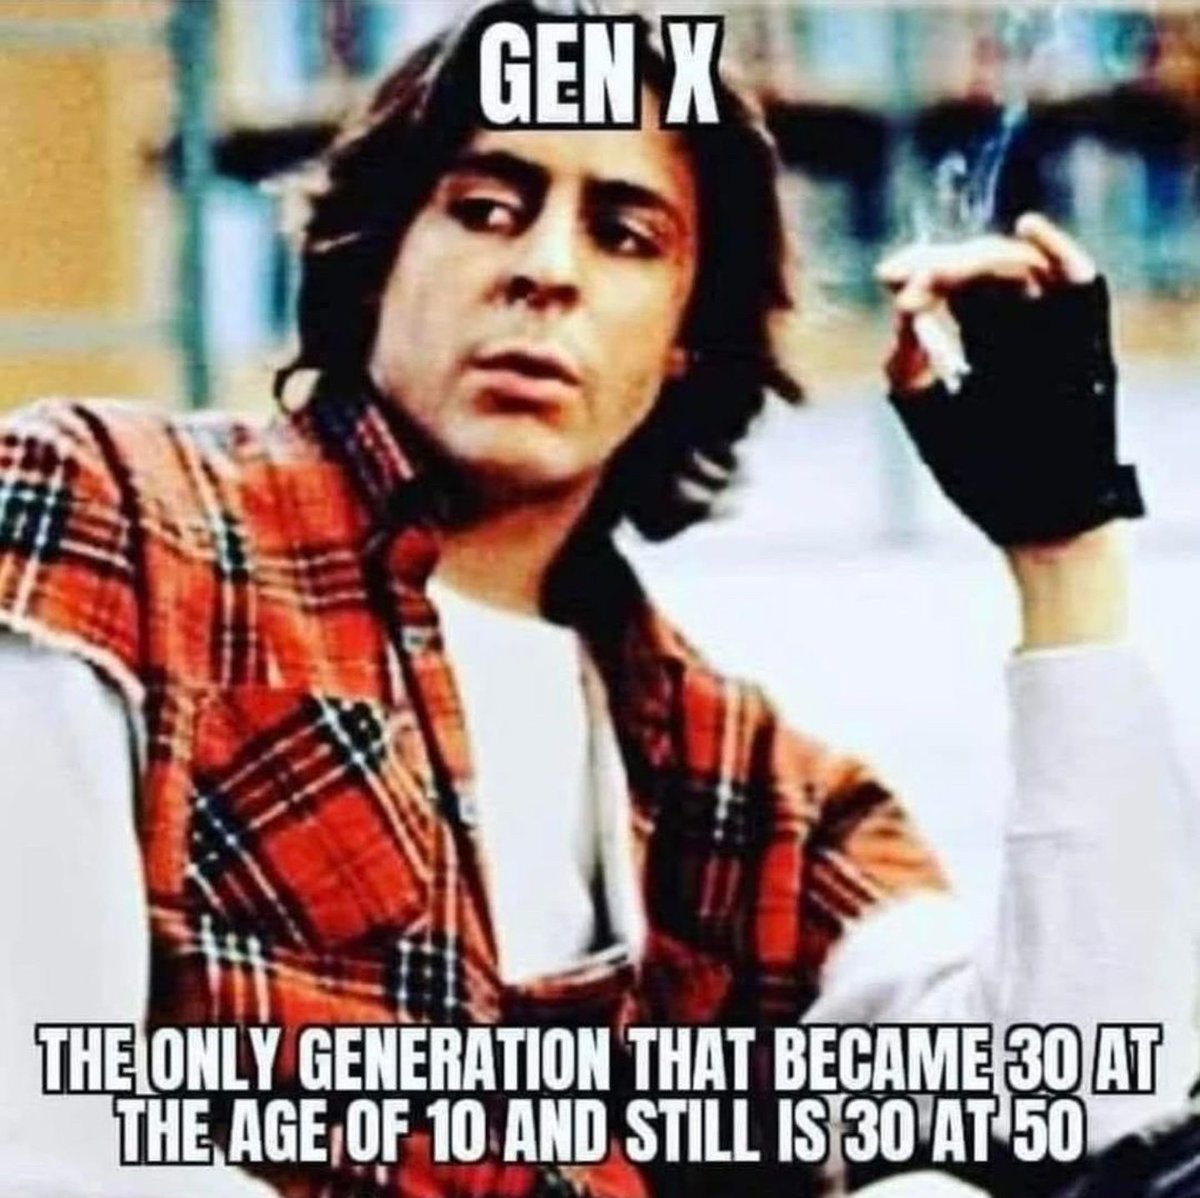 #GenX The only generation that became 30 at the age of 10 and still is 30 at 50 #Facts 💪😂